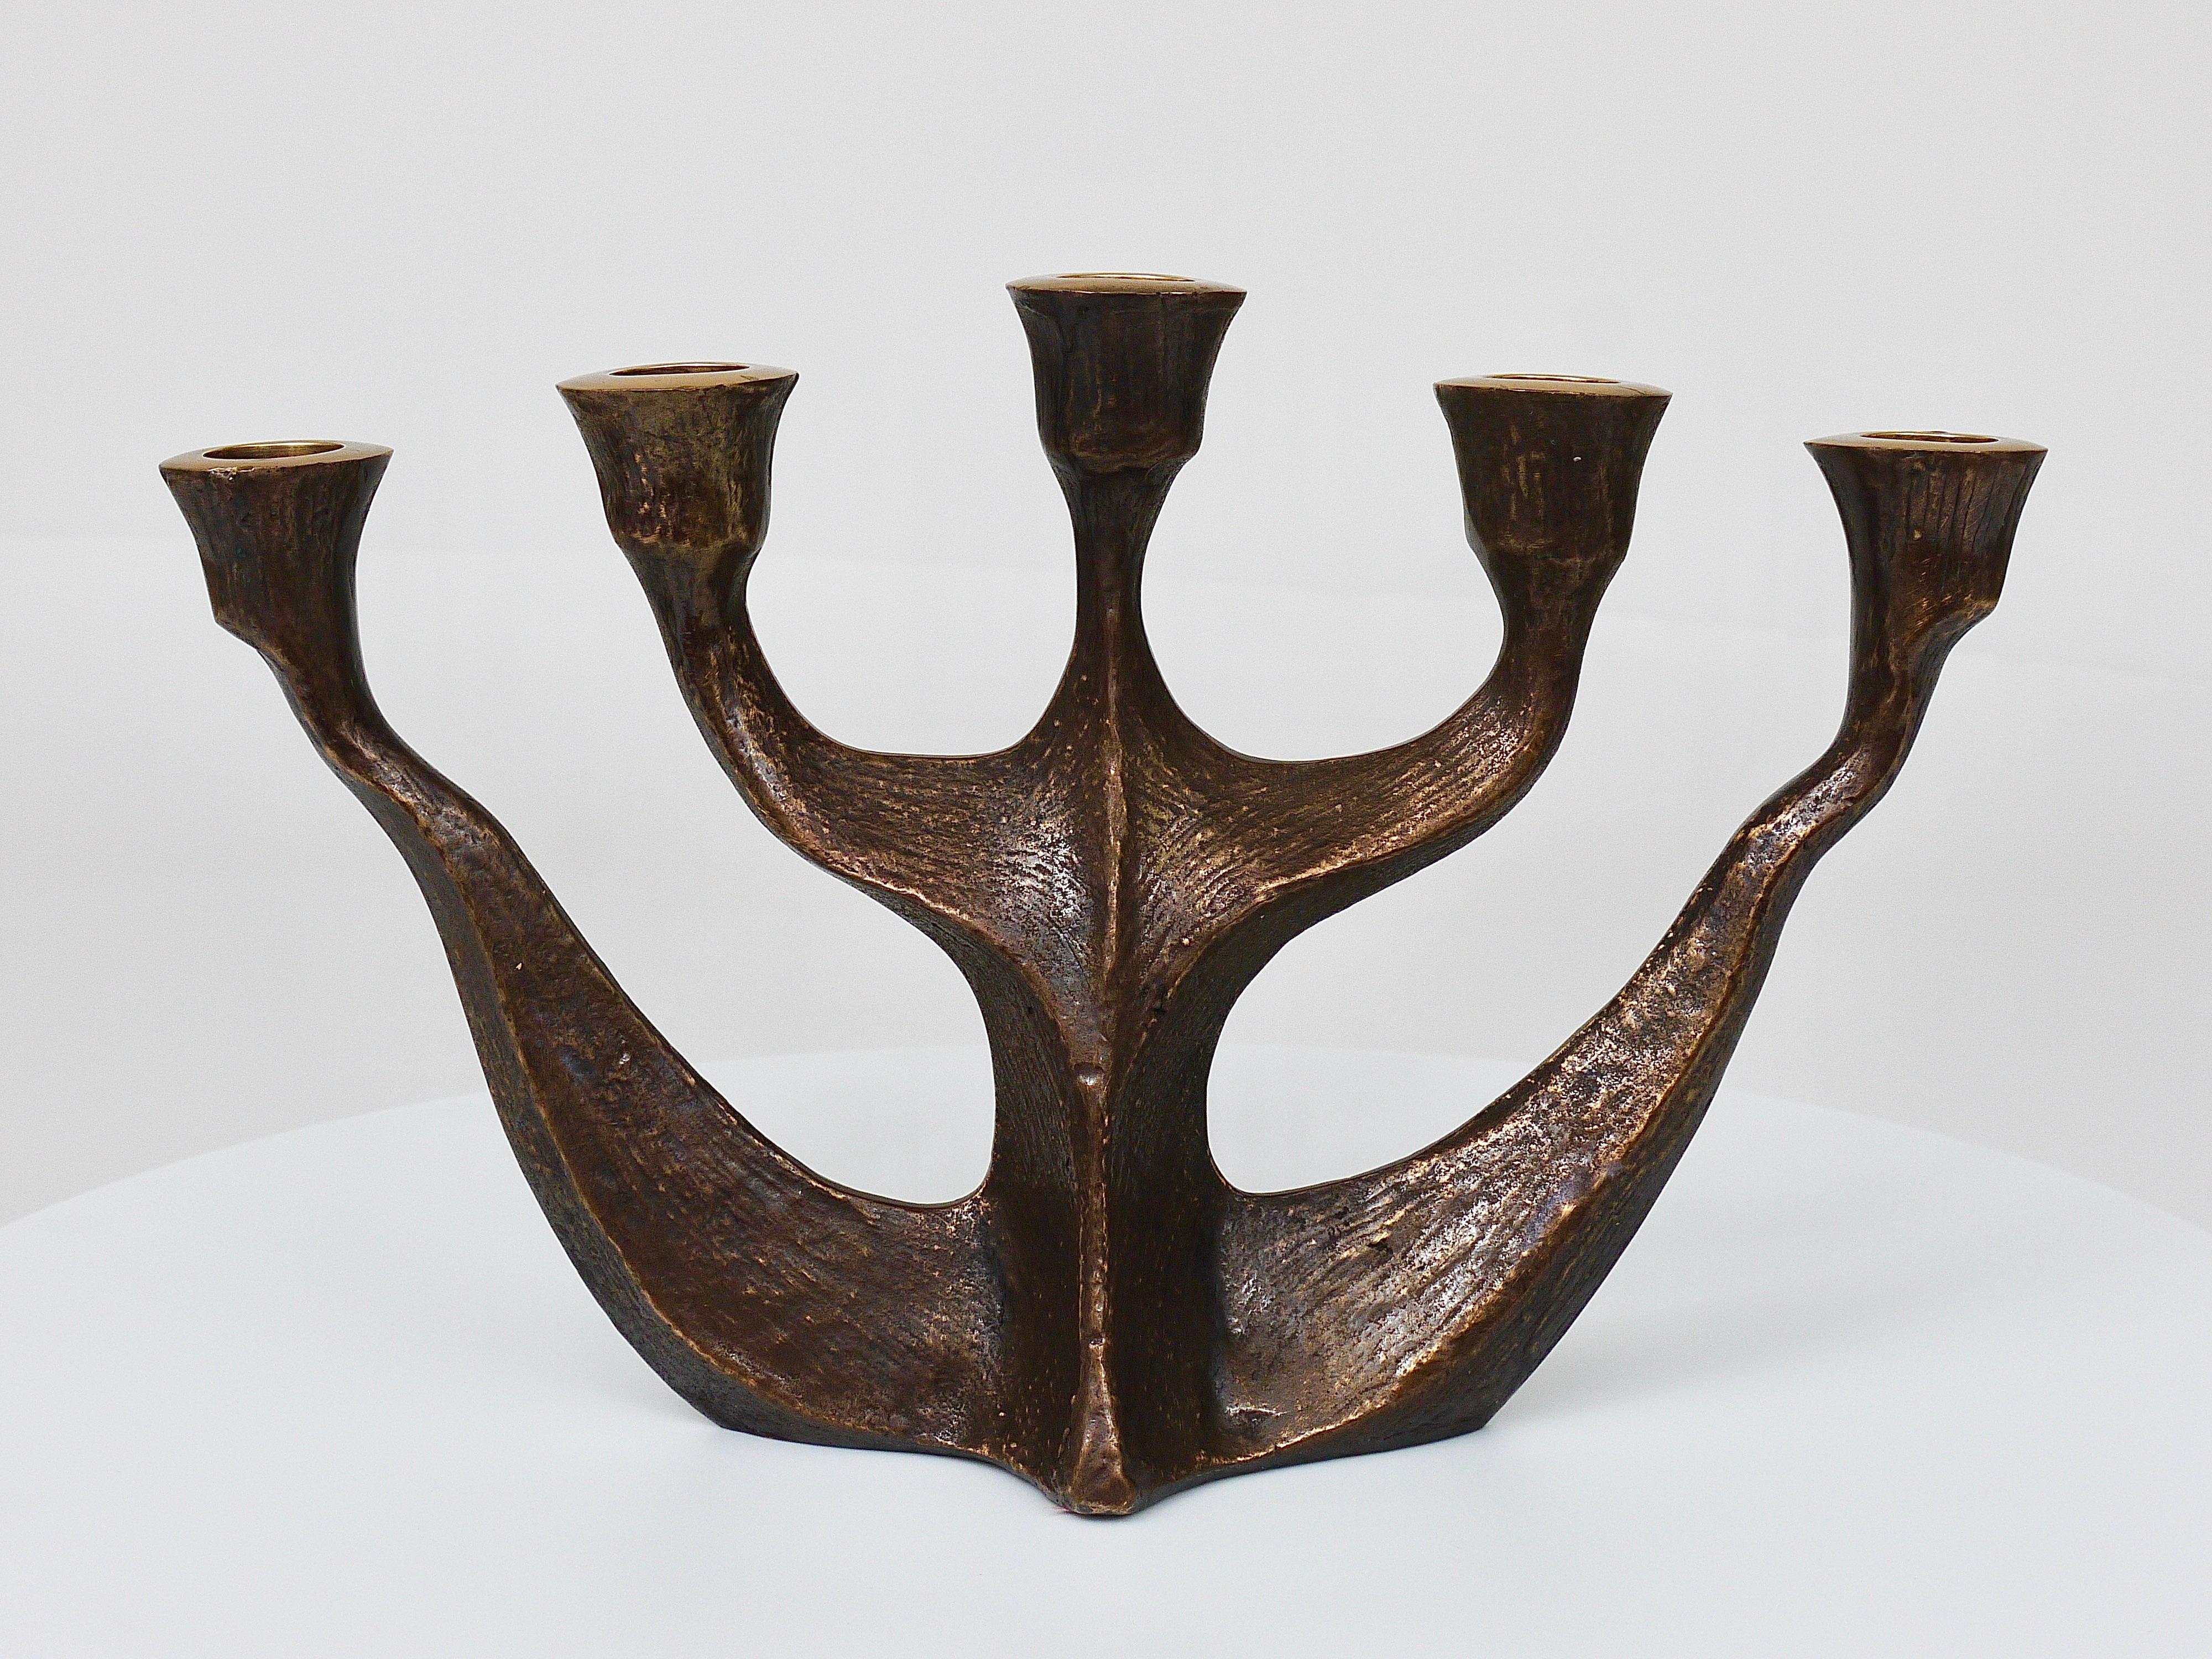 Up to Two Midcentury Brutalist Bronze Candleholders by Michael Harjes, 1960s For Sale 1